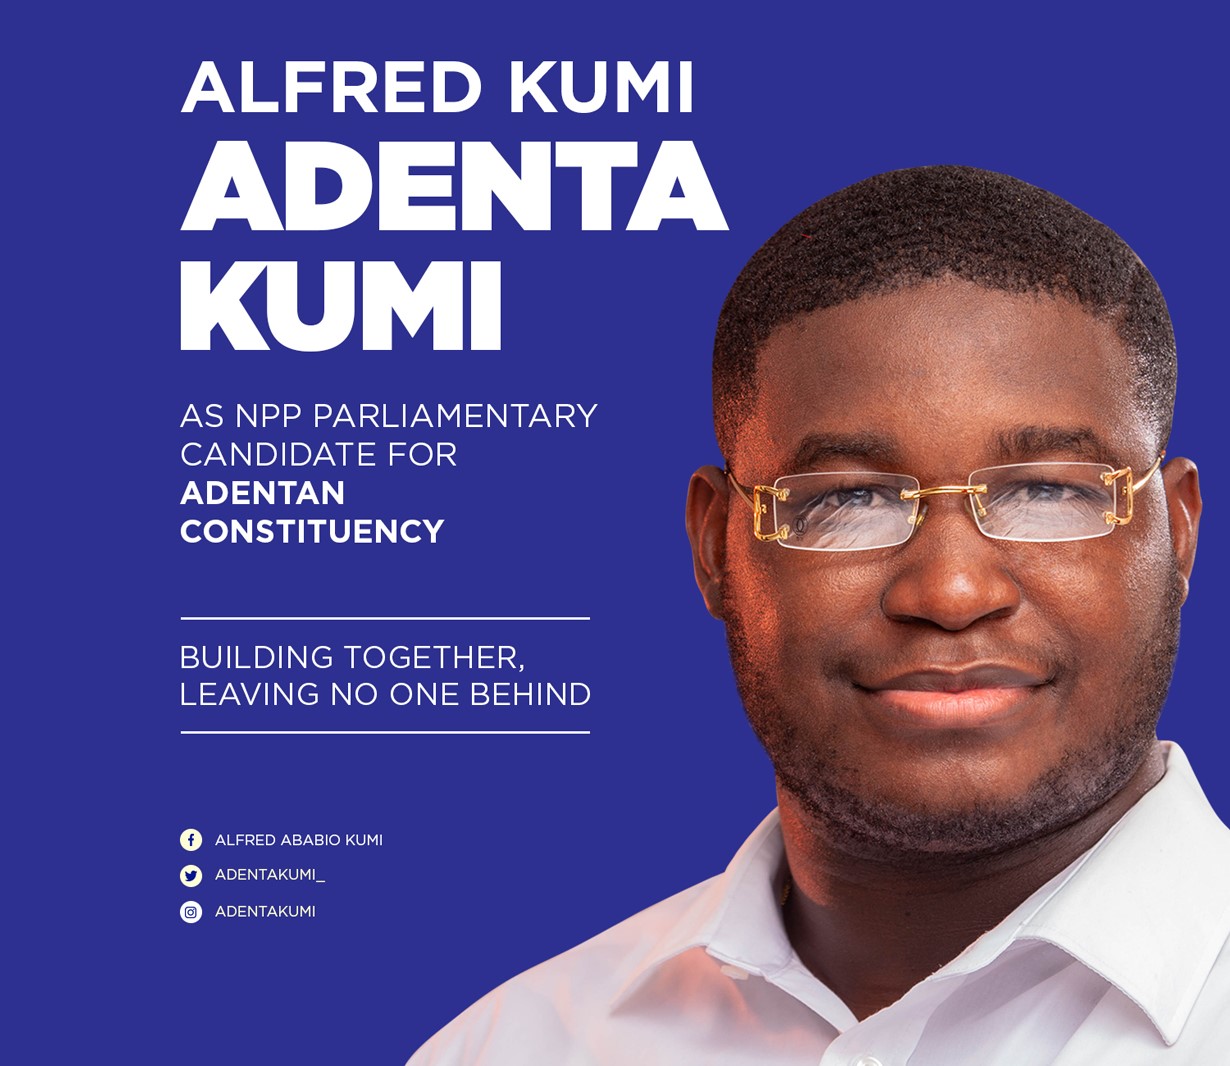 309 polling station executives contribute over GHS7,430 to fund Adenta Kumi